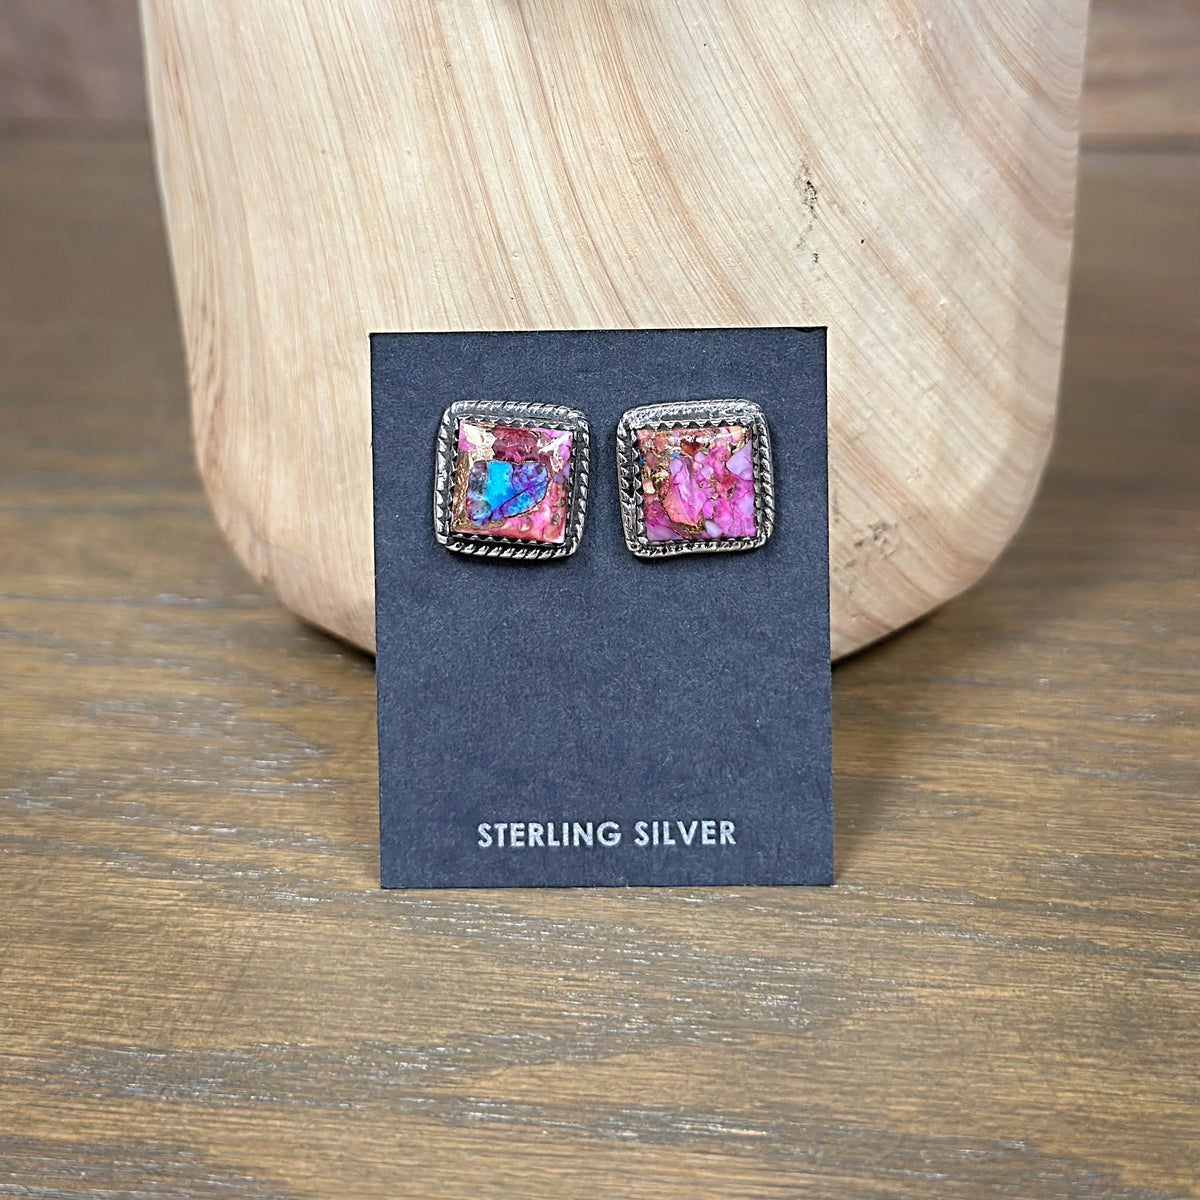 Handmade Sterling Silver Square Pink Dahlia Turquoise Stone Stud Earrings